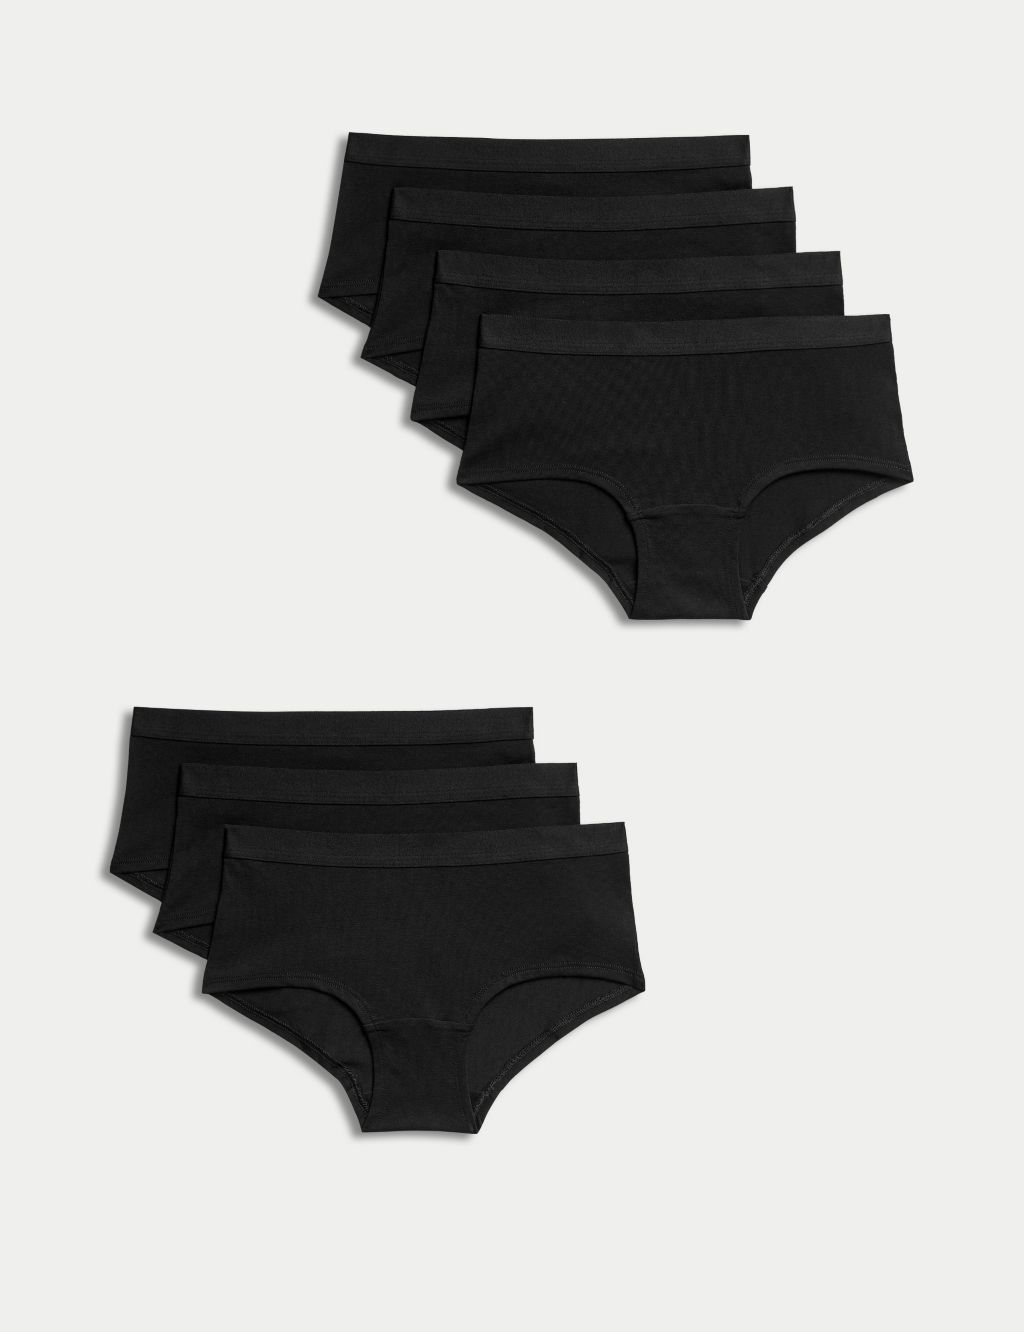 Maidenform Women's Barely There Boyshort Panties, Full-Coverage Underwear,  Seamless, 3-Pack, Almond/Black/Almond at  Women's Clothing store